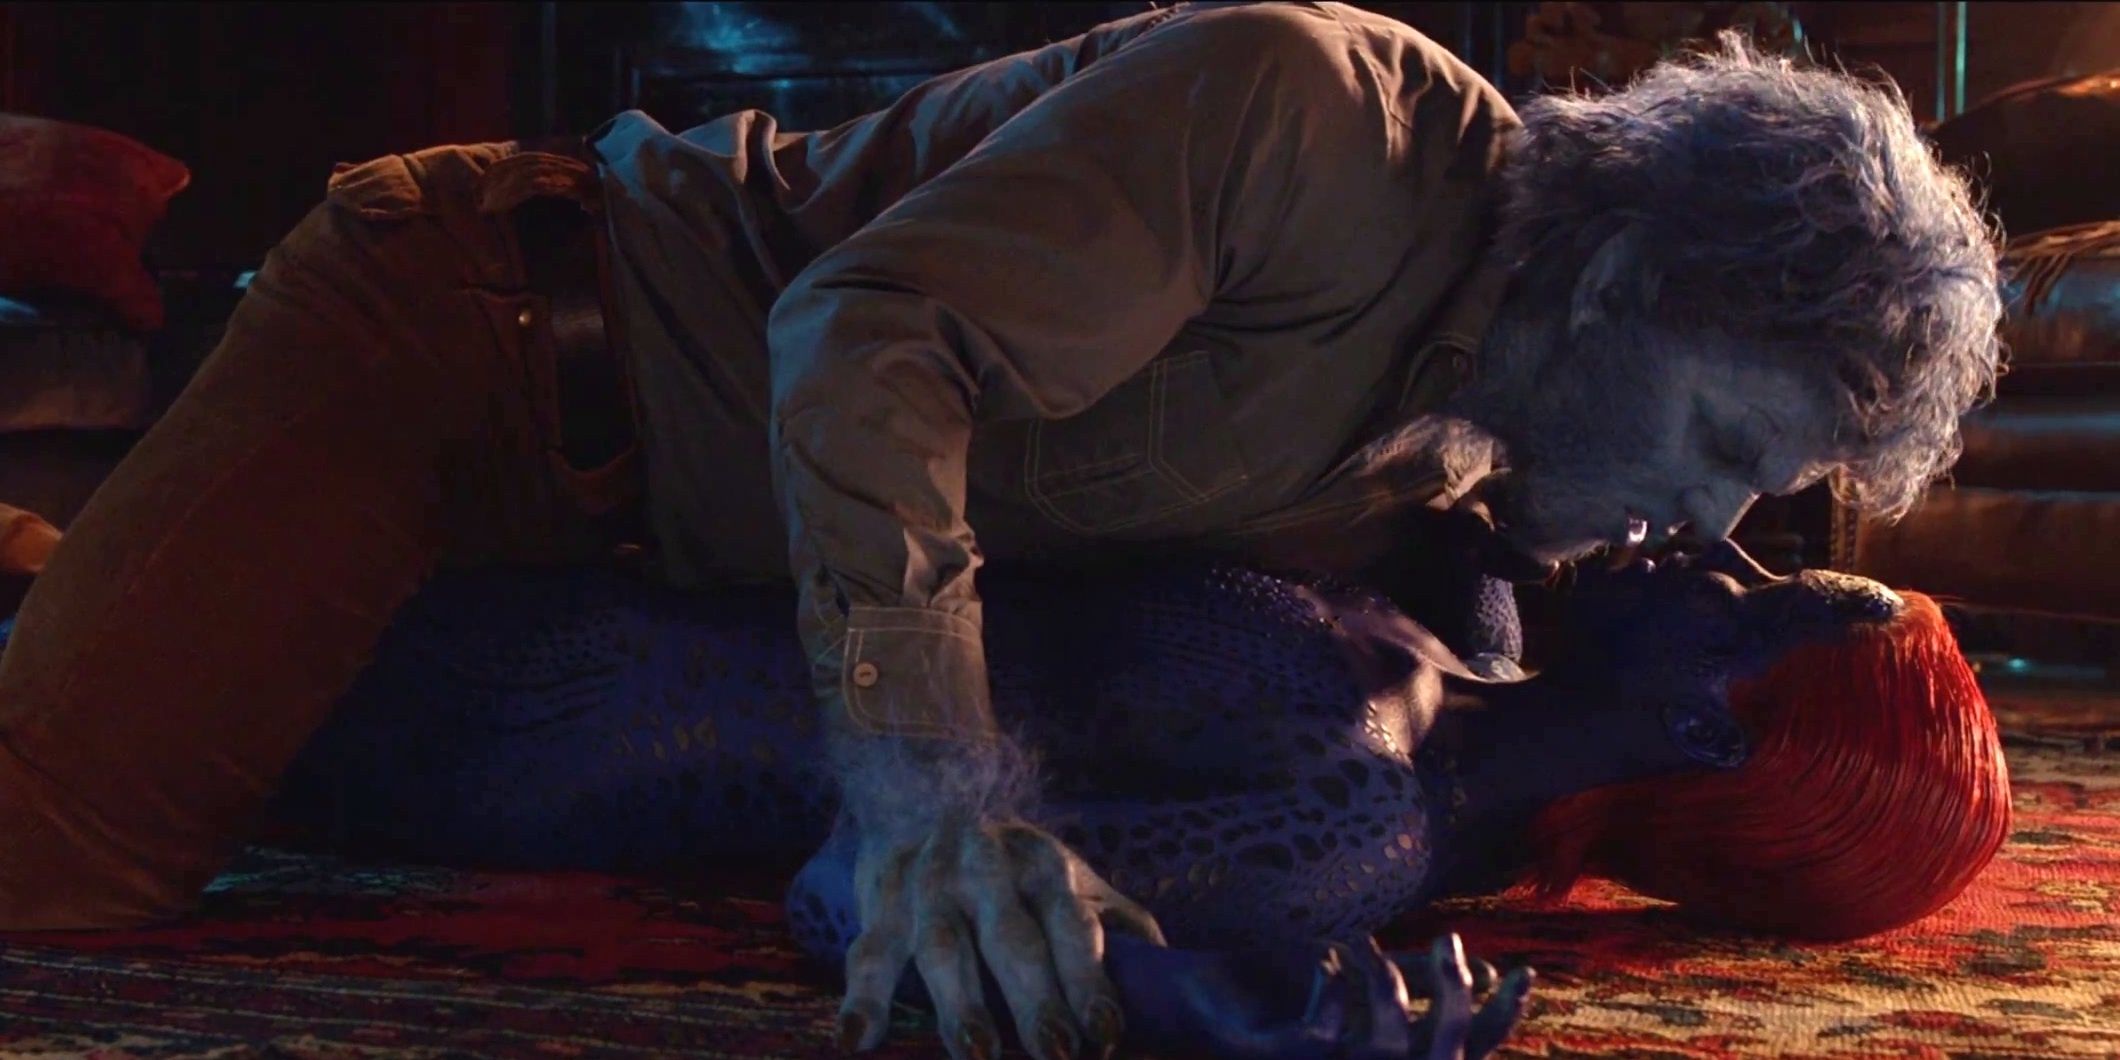 Beast and Mystique reconnect in X-Men: Days of Future Past